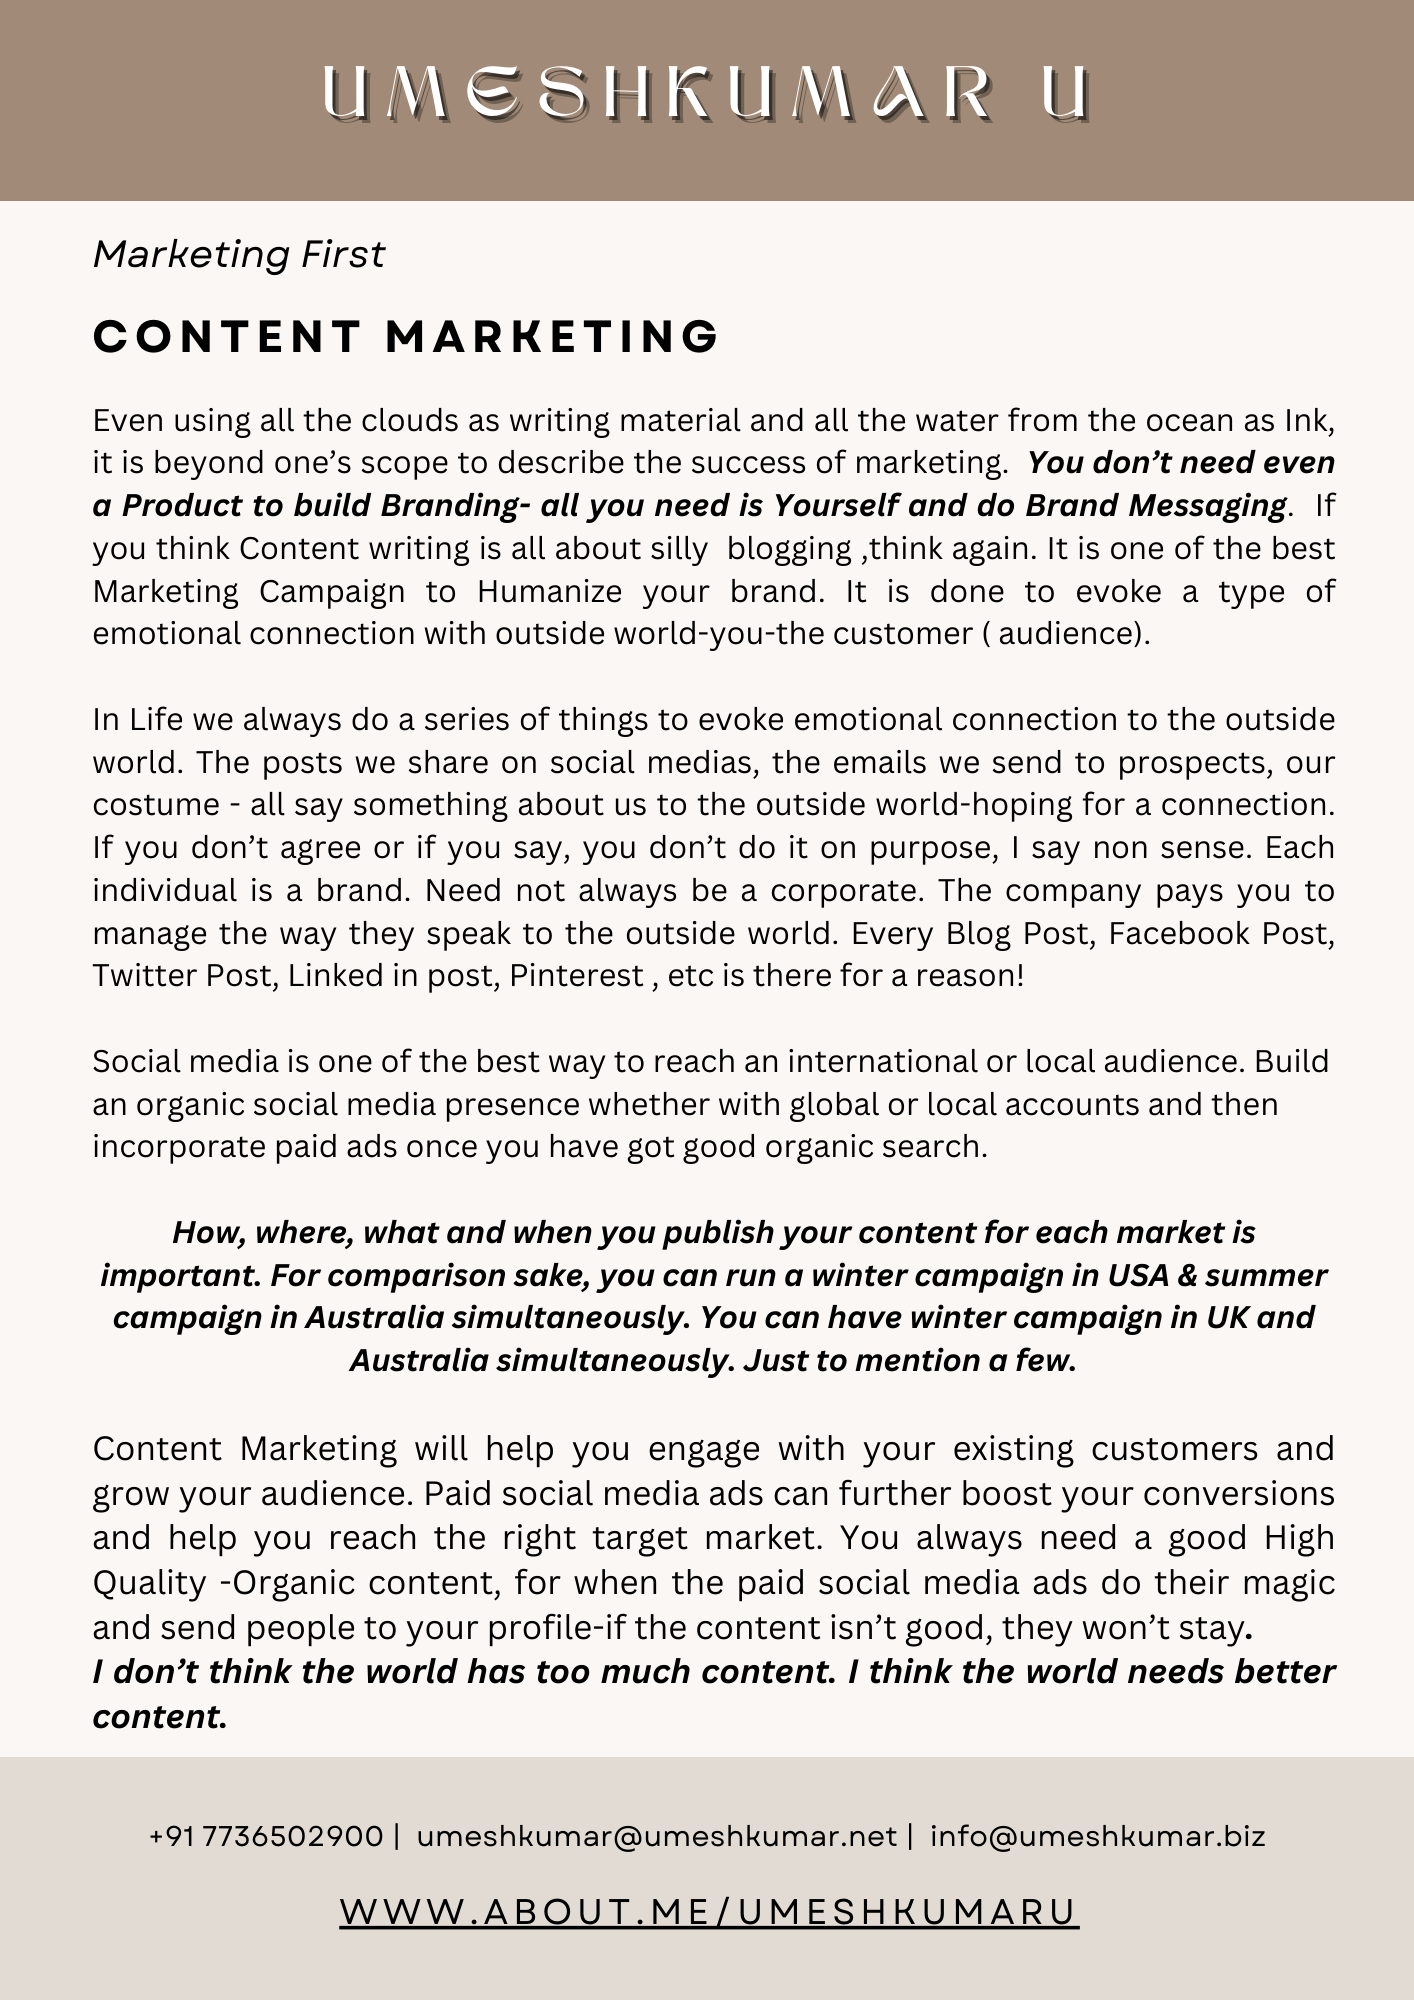 IMPORTANCE OF CONTENT MARKETING CAMPAIGN